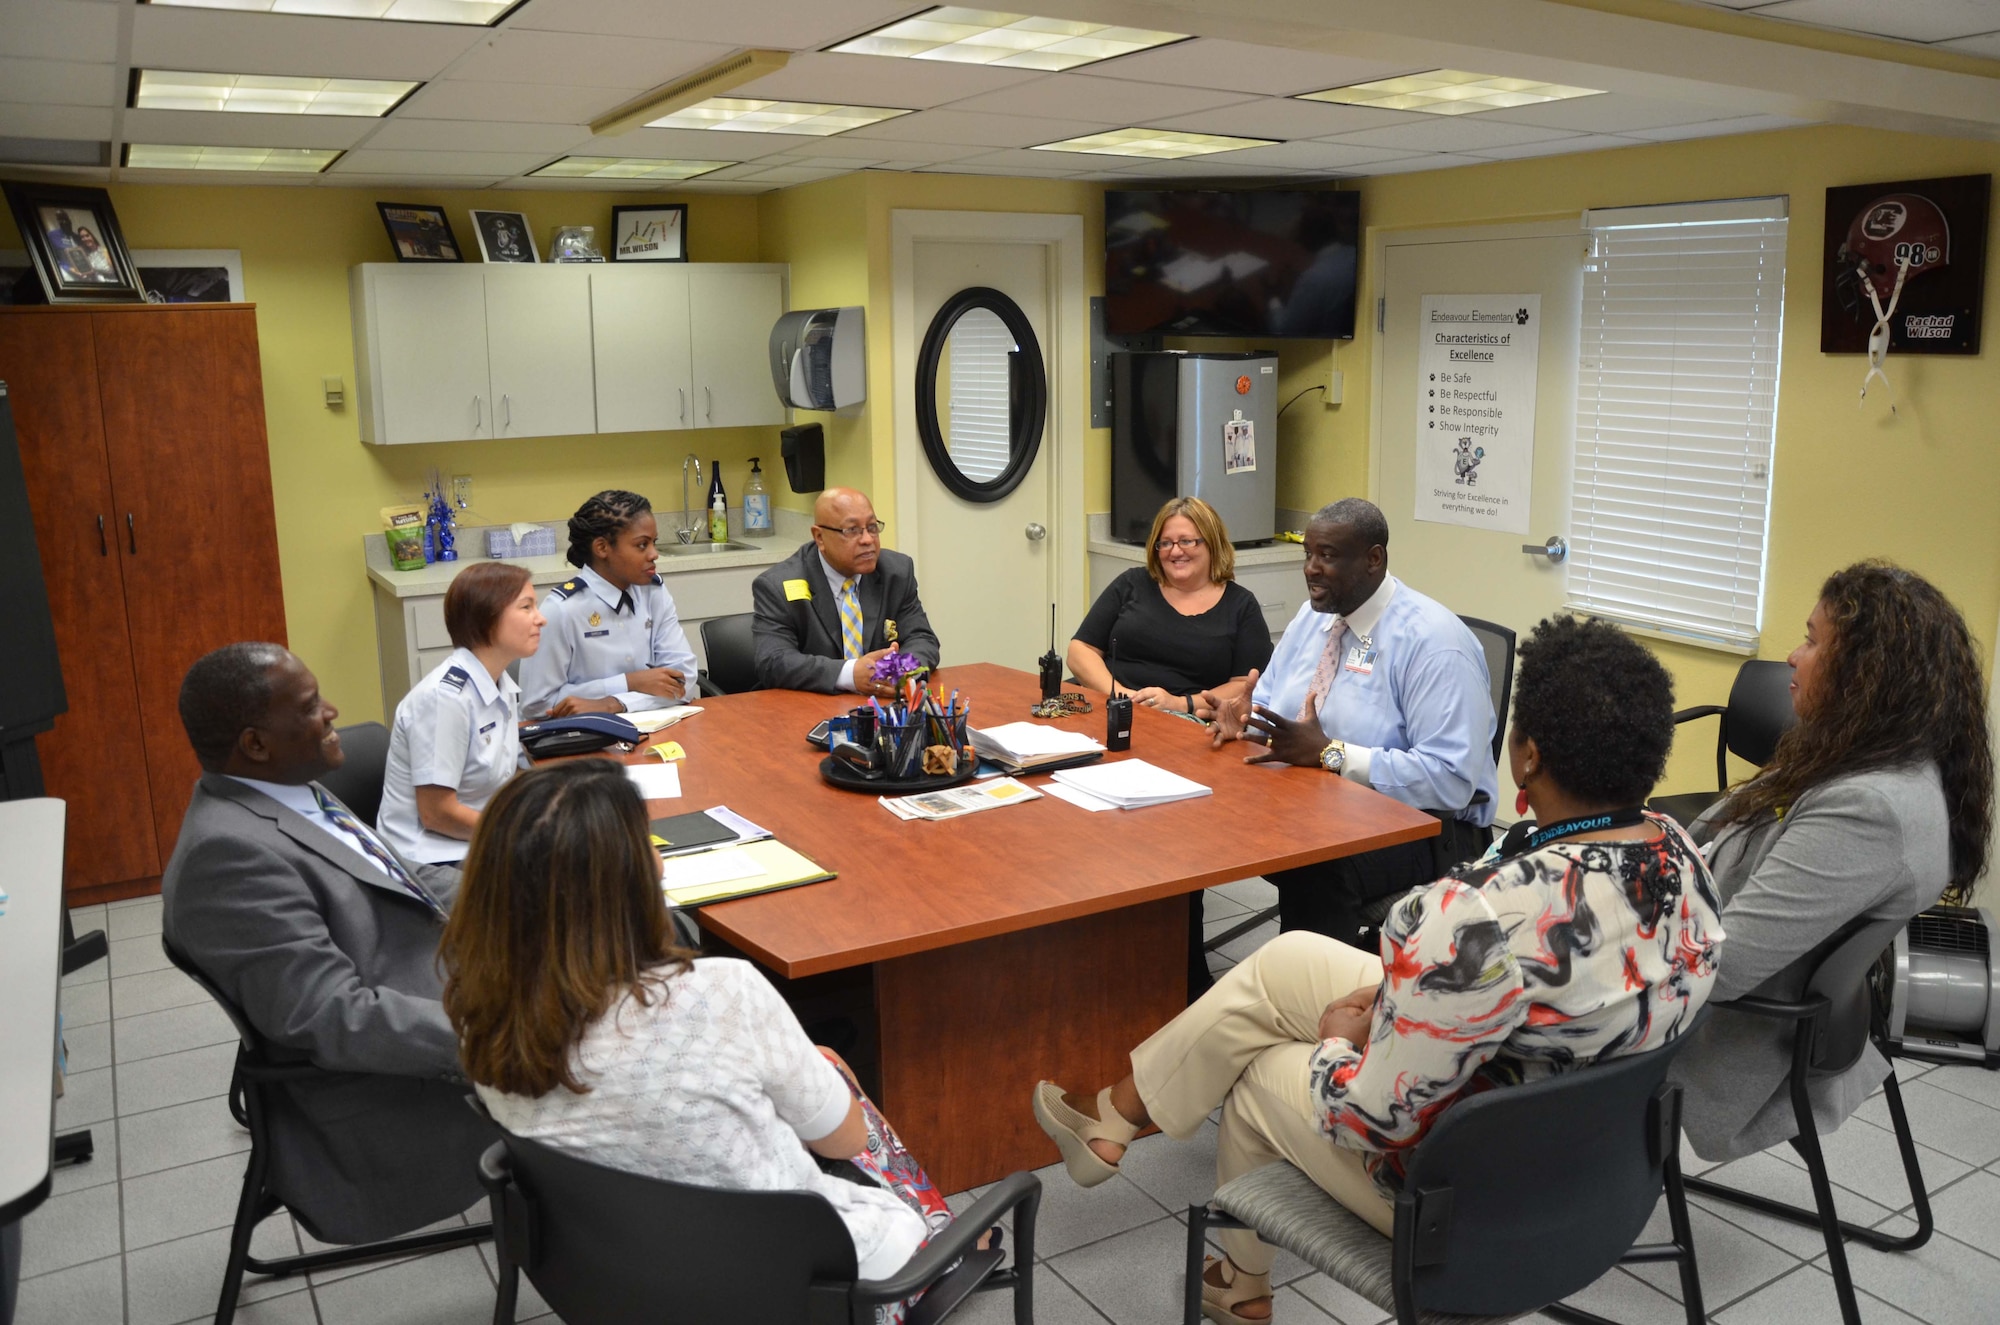 Rachad Wilson (right, in light blue), principal of Endeavour Elementary School, Cocoa, Fla., discusses the community school program with Dr. Jarris L. Taylor Jr.,  Deputy Assistant Secretary of the Air Force for Strategic Diversity Initiative, Sept. 7, 2016.  Taylor and members of his staff were in town for the Women in Science and Engineering Symposium hosted by the Air Force Technical Applications Center at Patrick AFB, Fla., which is also a community partner with the local elementary school.  Also pictured starting from bottom left to right:  Doreen Carlo-Coryell, Endeavour’s assistant principal; Michele Scott, planning director for Children’s Home Society; Rose Day, AFTAC’s human resources program manager; Wilson, Christy Meraz, Endeavour’s assistant principal; Ed Lee, program coordinator for historically black colleges and minority institutions; Maj. Denisha Darcus and Col. Angela Giddings, both with the Air Force Diversity and Inclusion office; and Taylor.  (U.S. Air Force photo by Susan A. Romano)